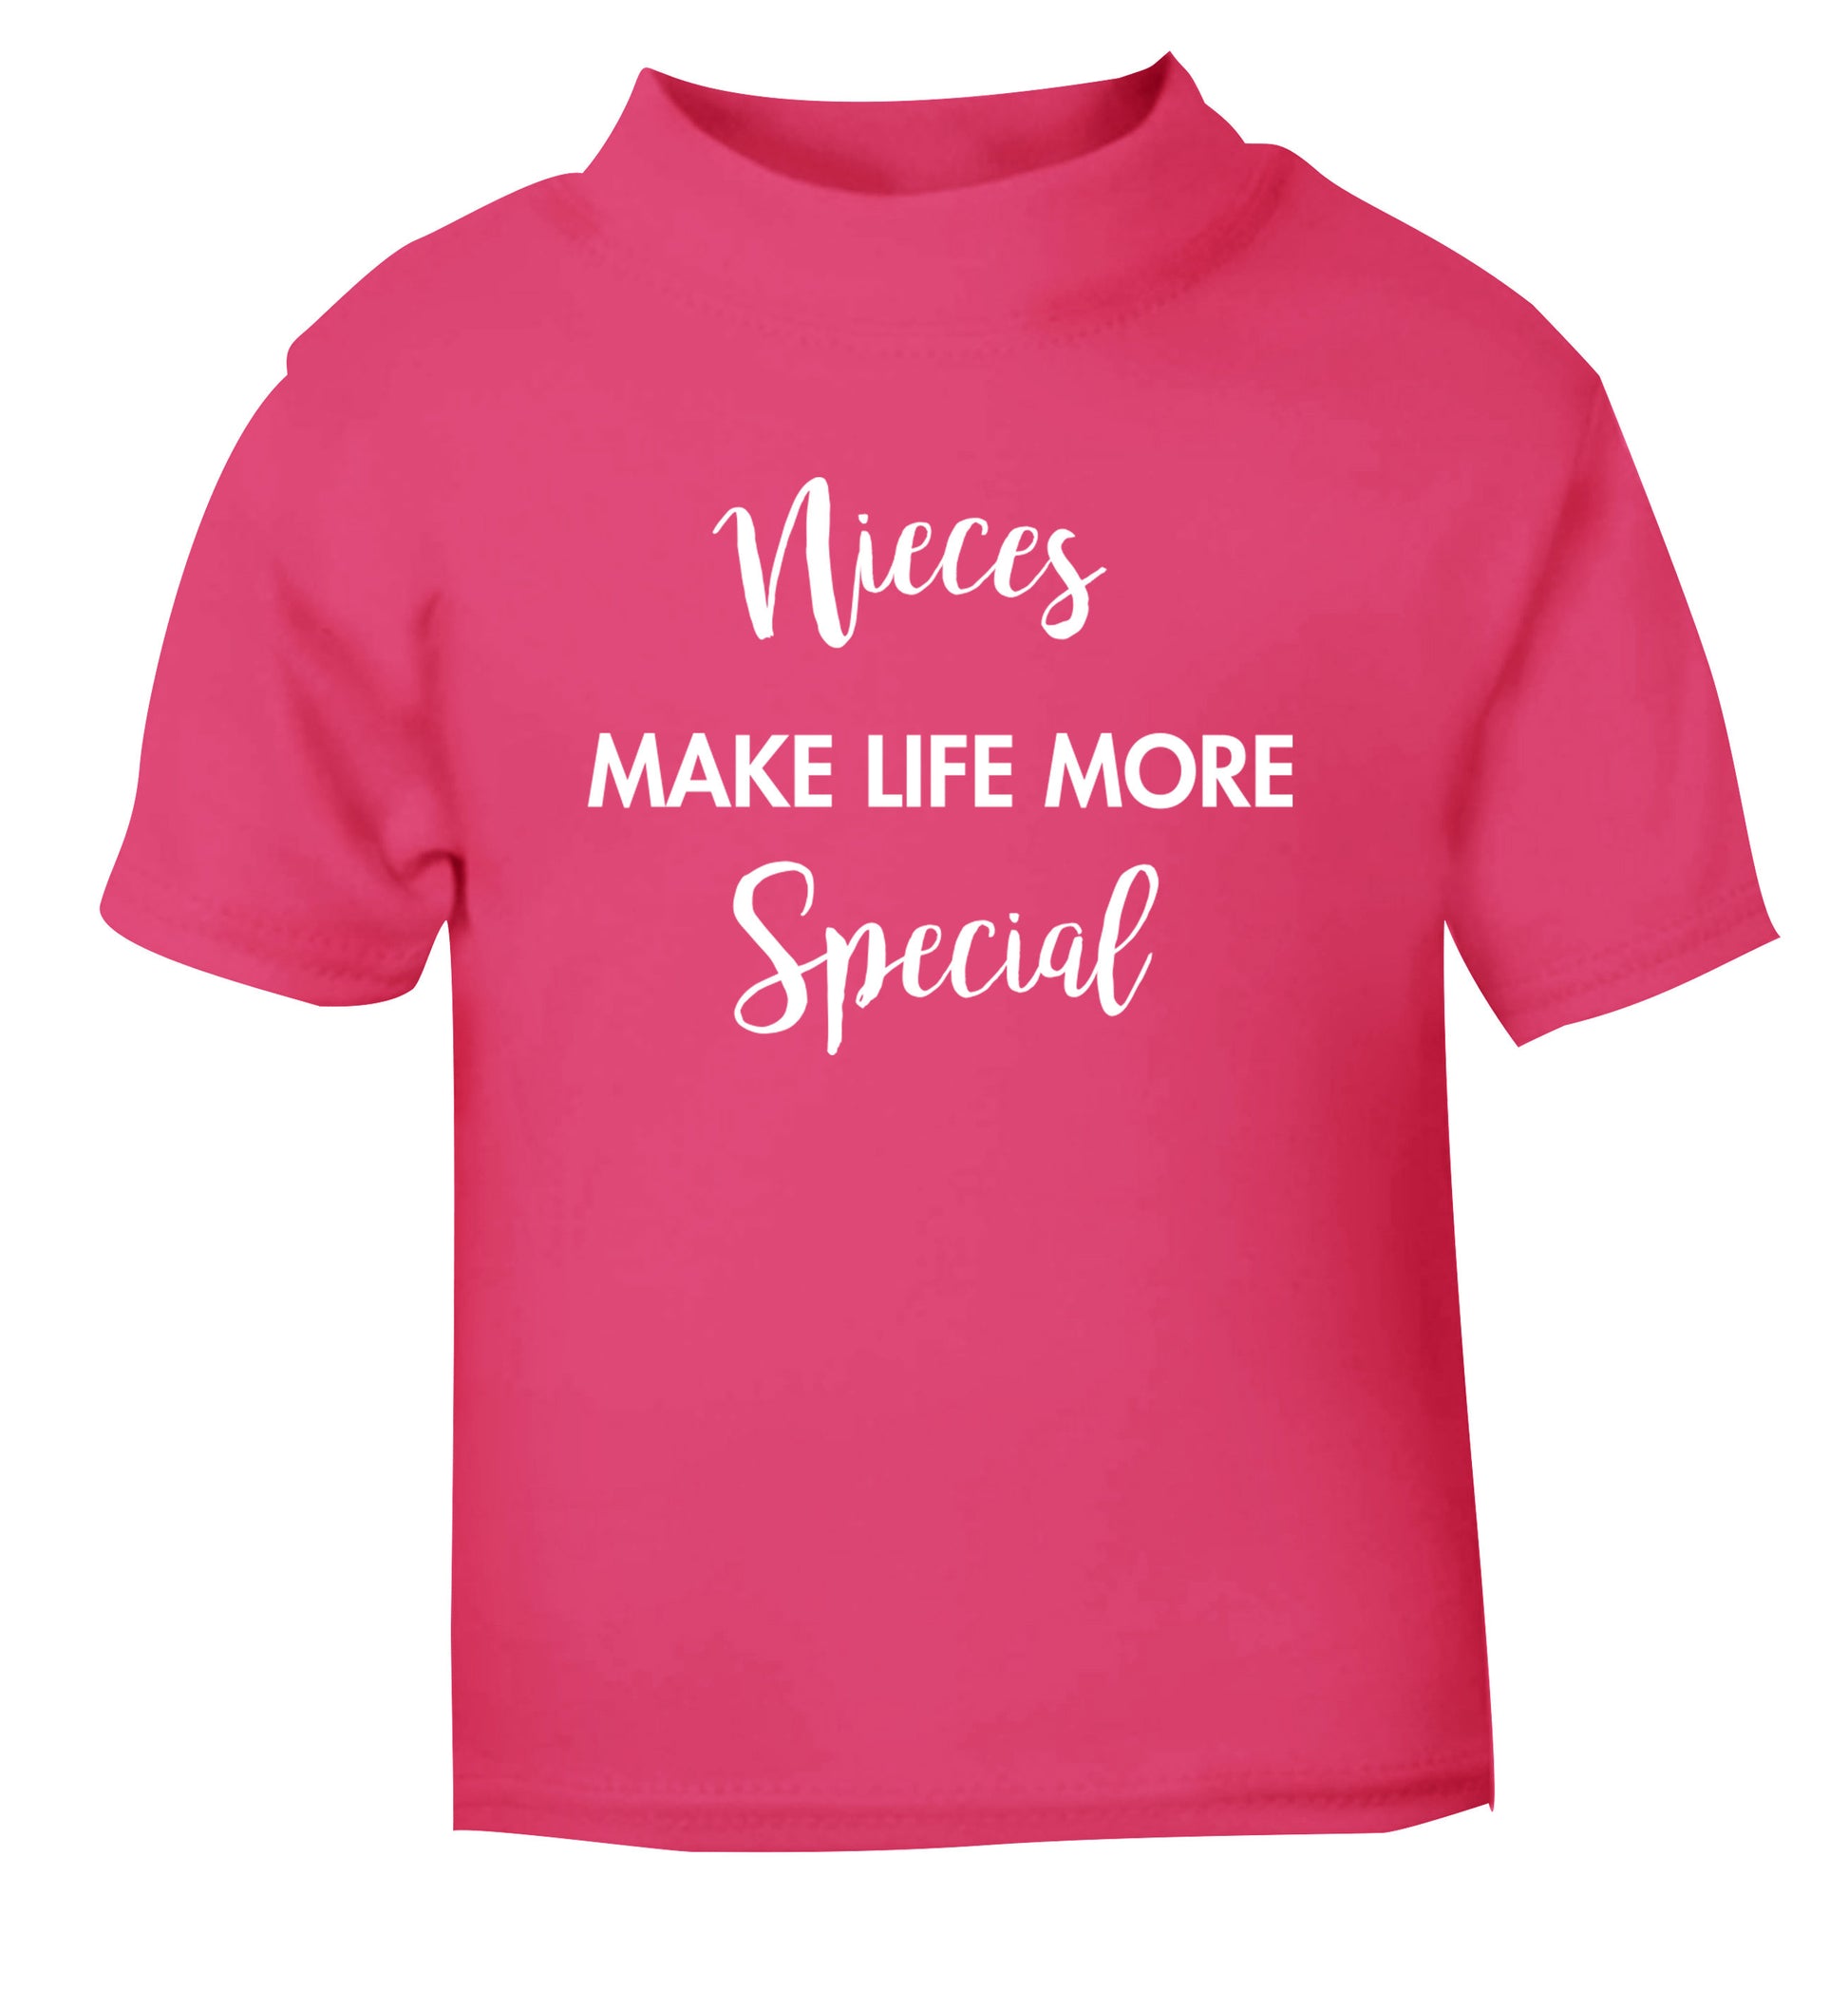 Nieces make life more special pink Baby Toddler Tshirt 2 Years